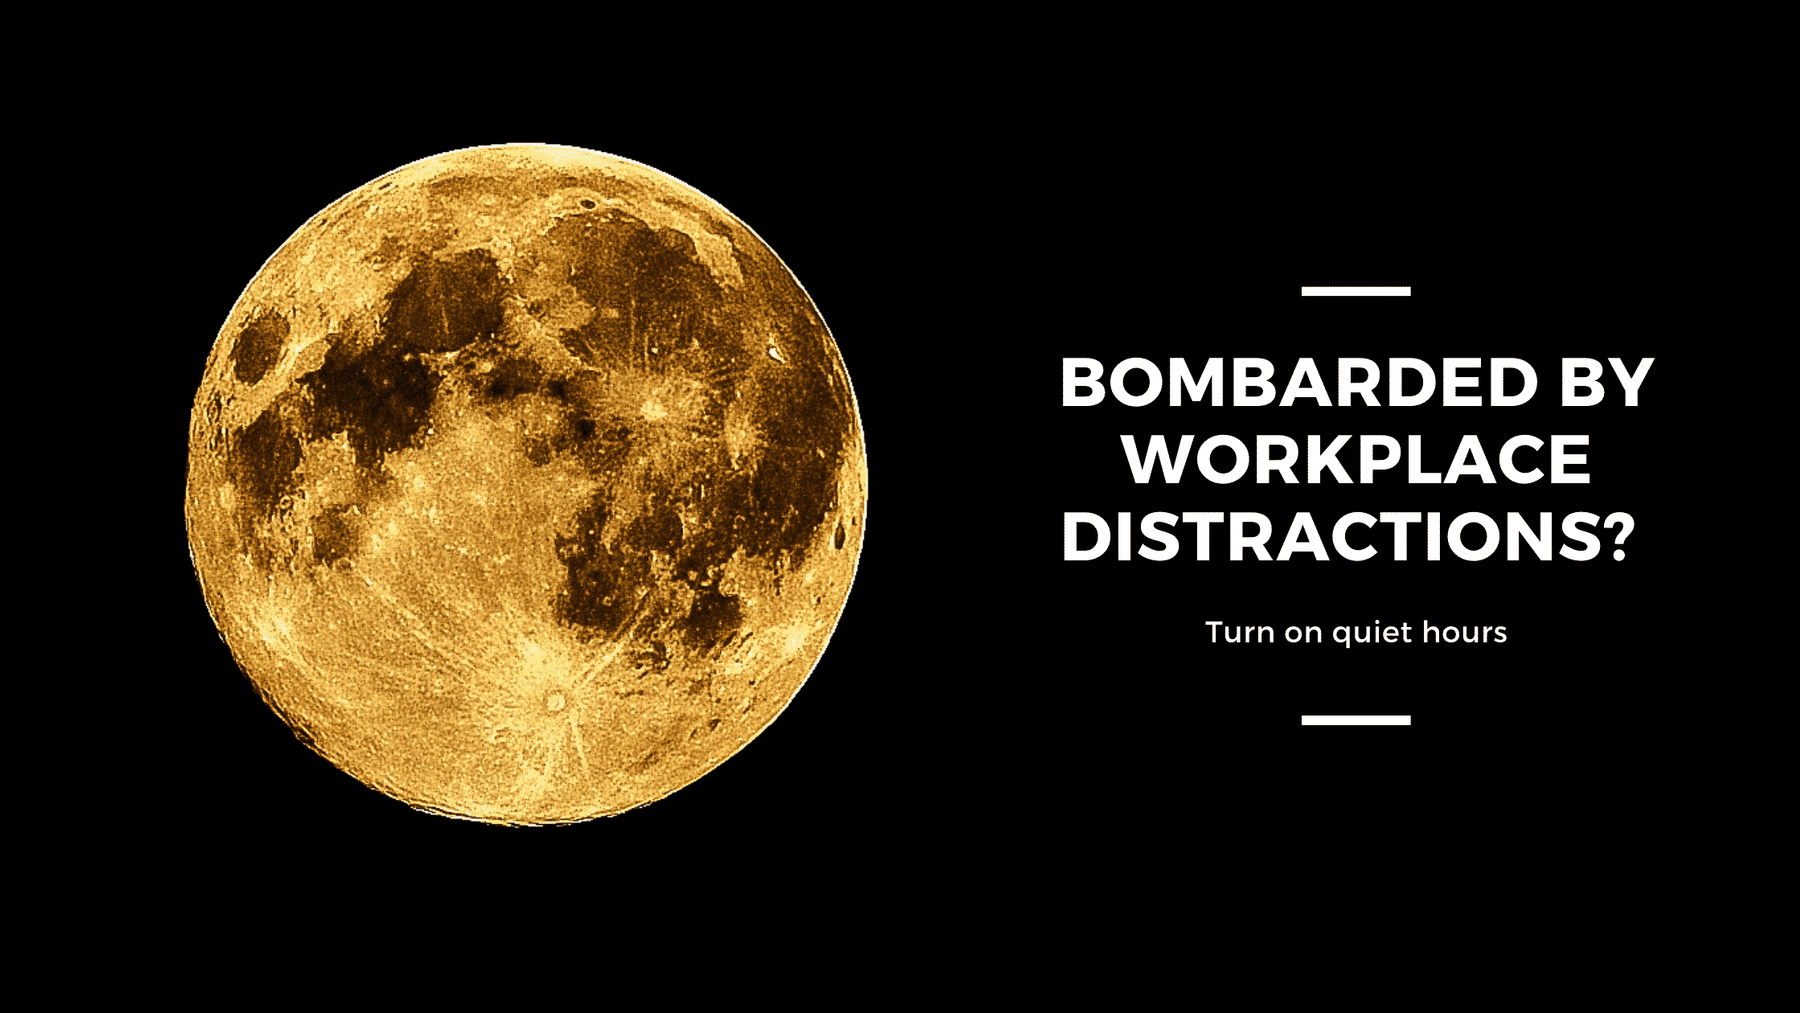 Bombarded by workplace distractions? Turn on Quite Hours